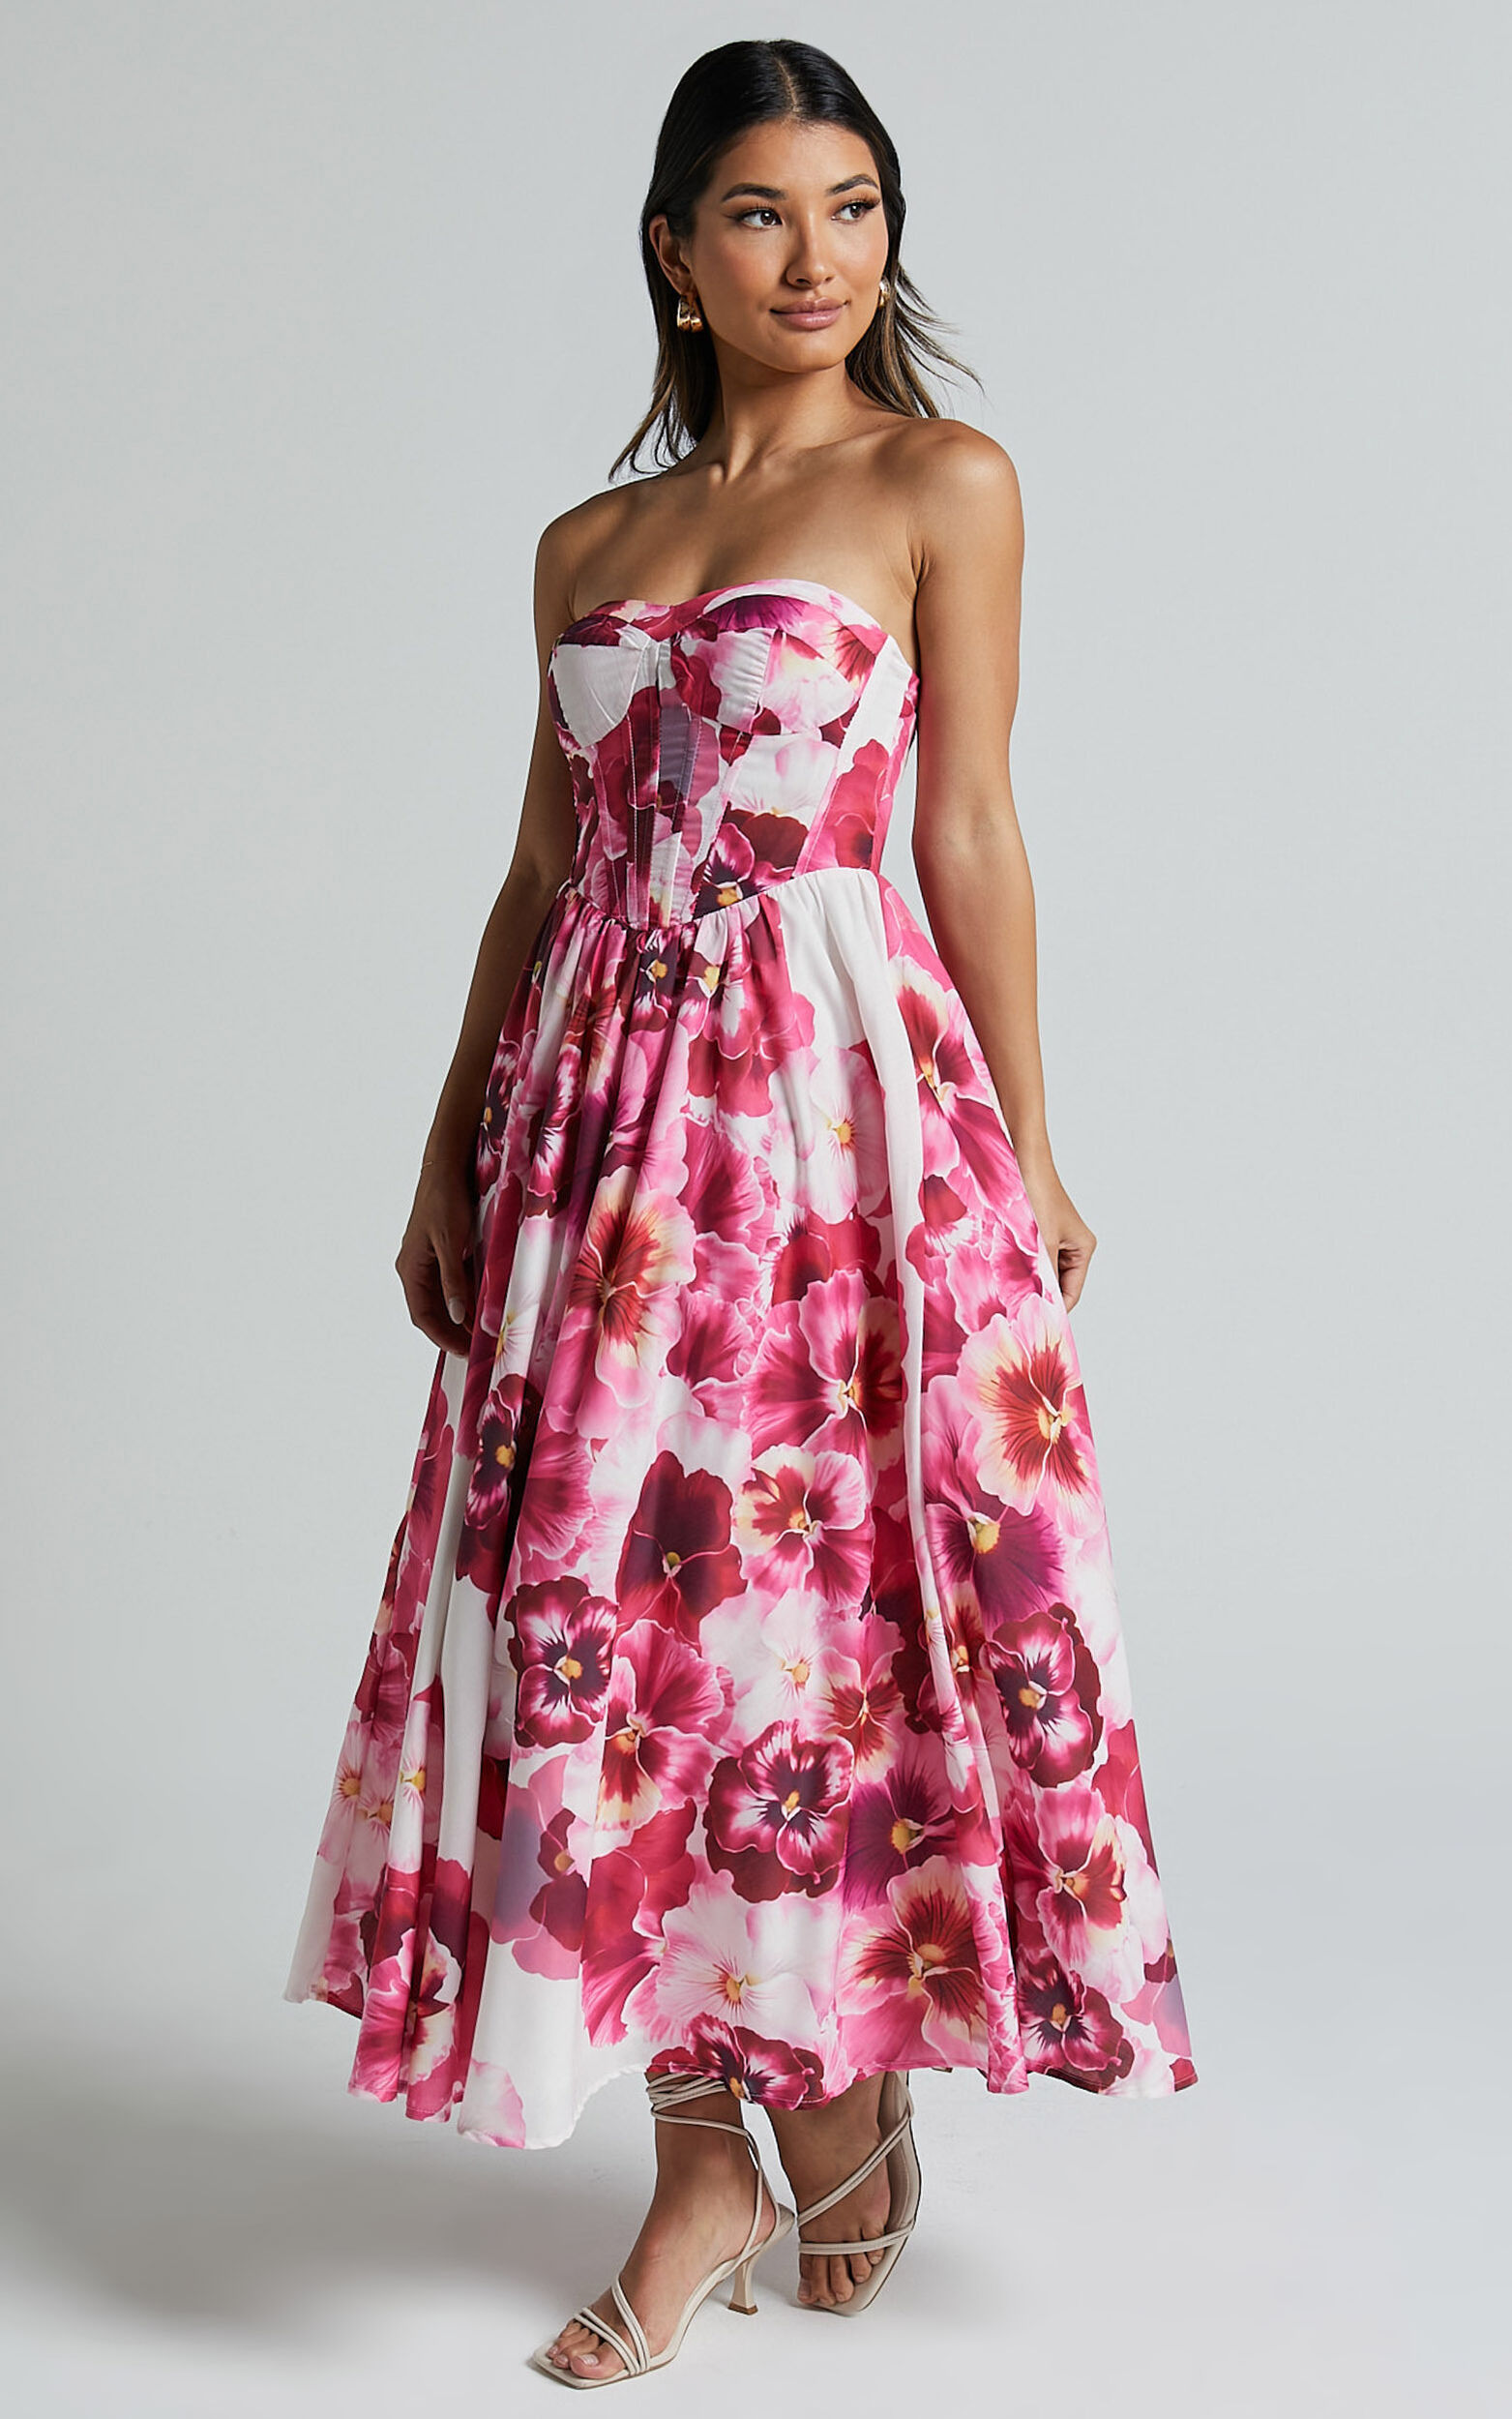 Strapless Bandeau Dress in Pink Floral Geo - Holley Day